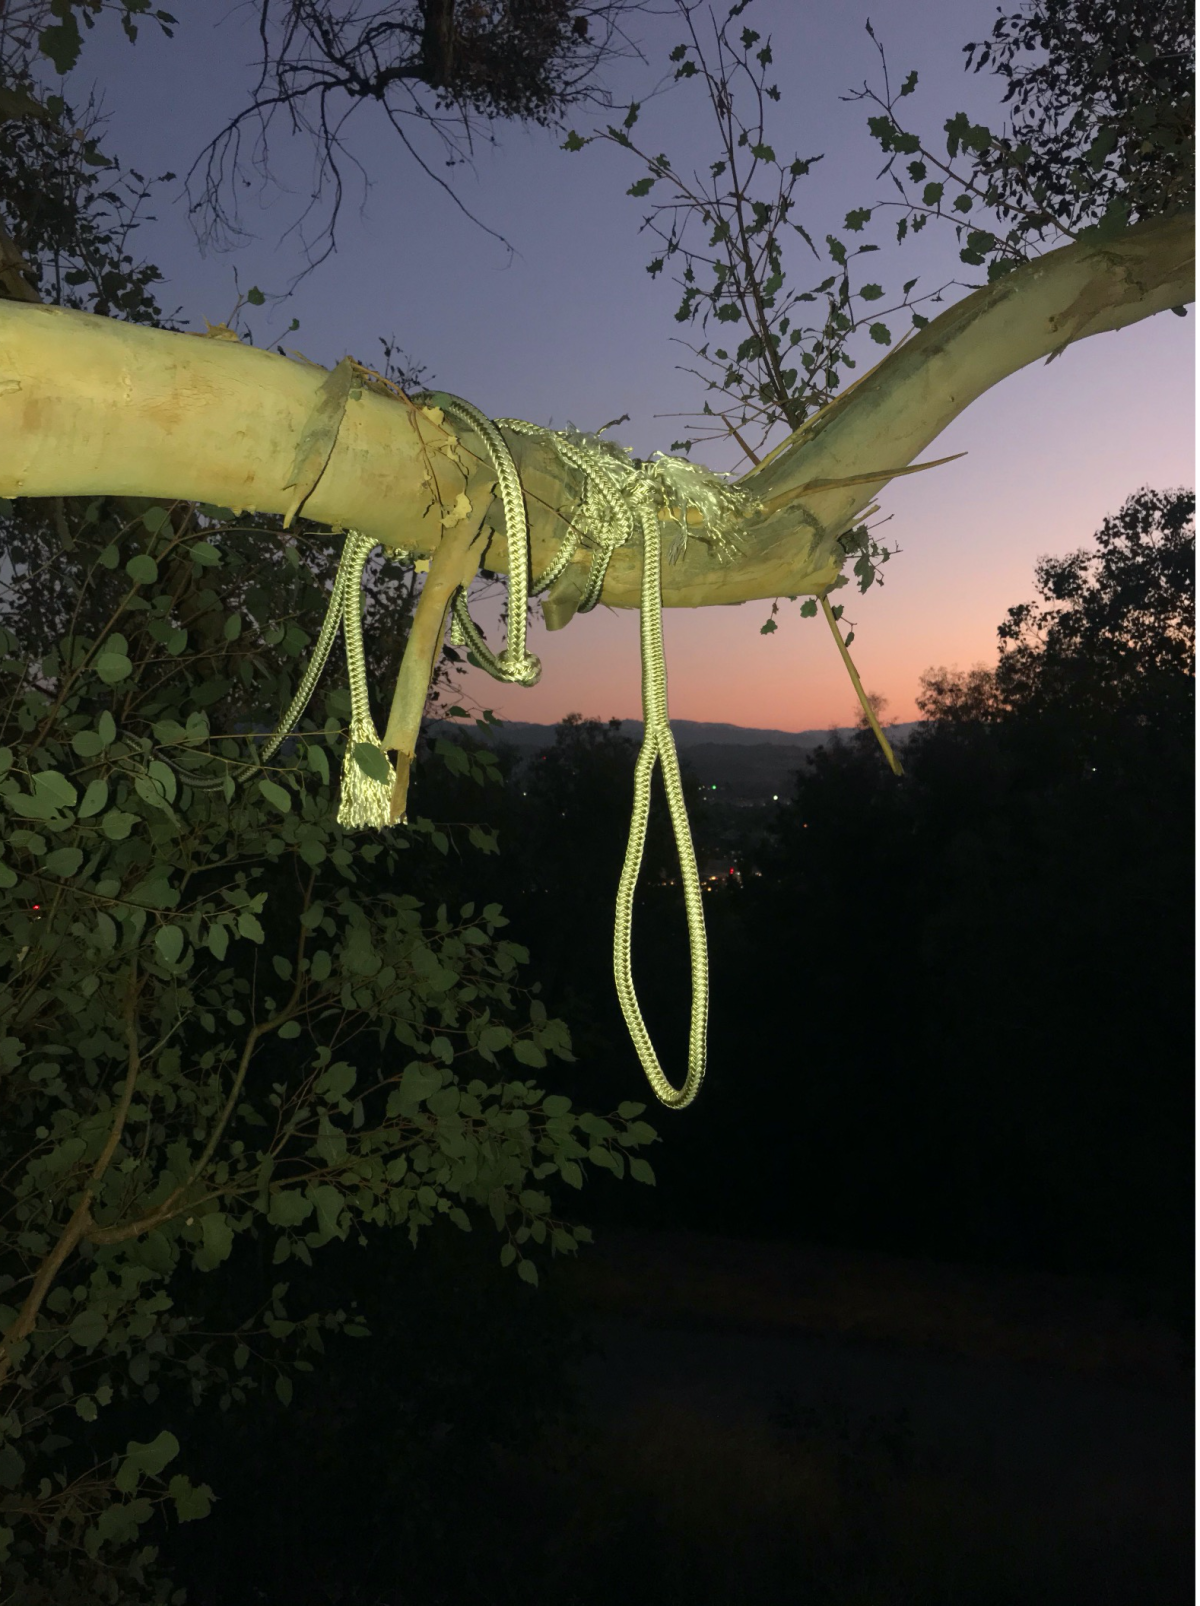 The noose-like rope found in Santa Clarita hangs from a tree on Monday evening.